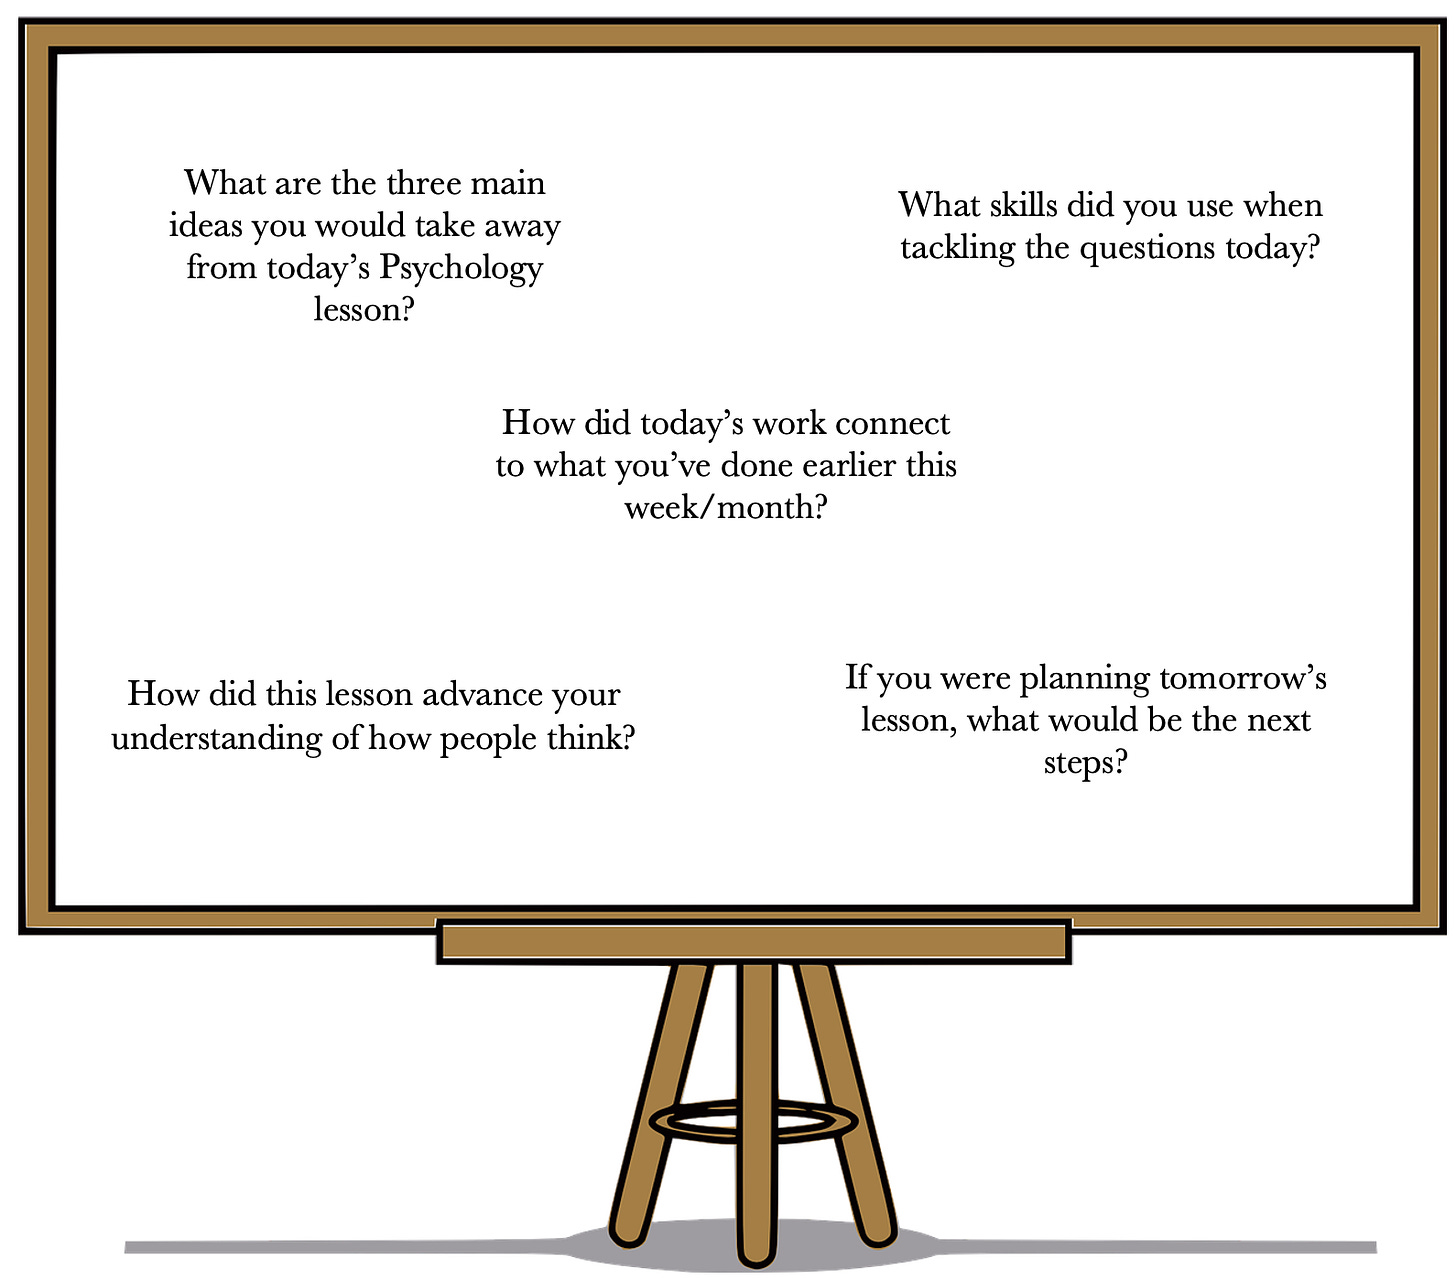 A whiteboard showing 5 questions